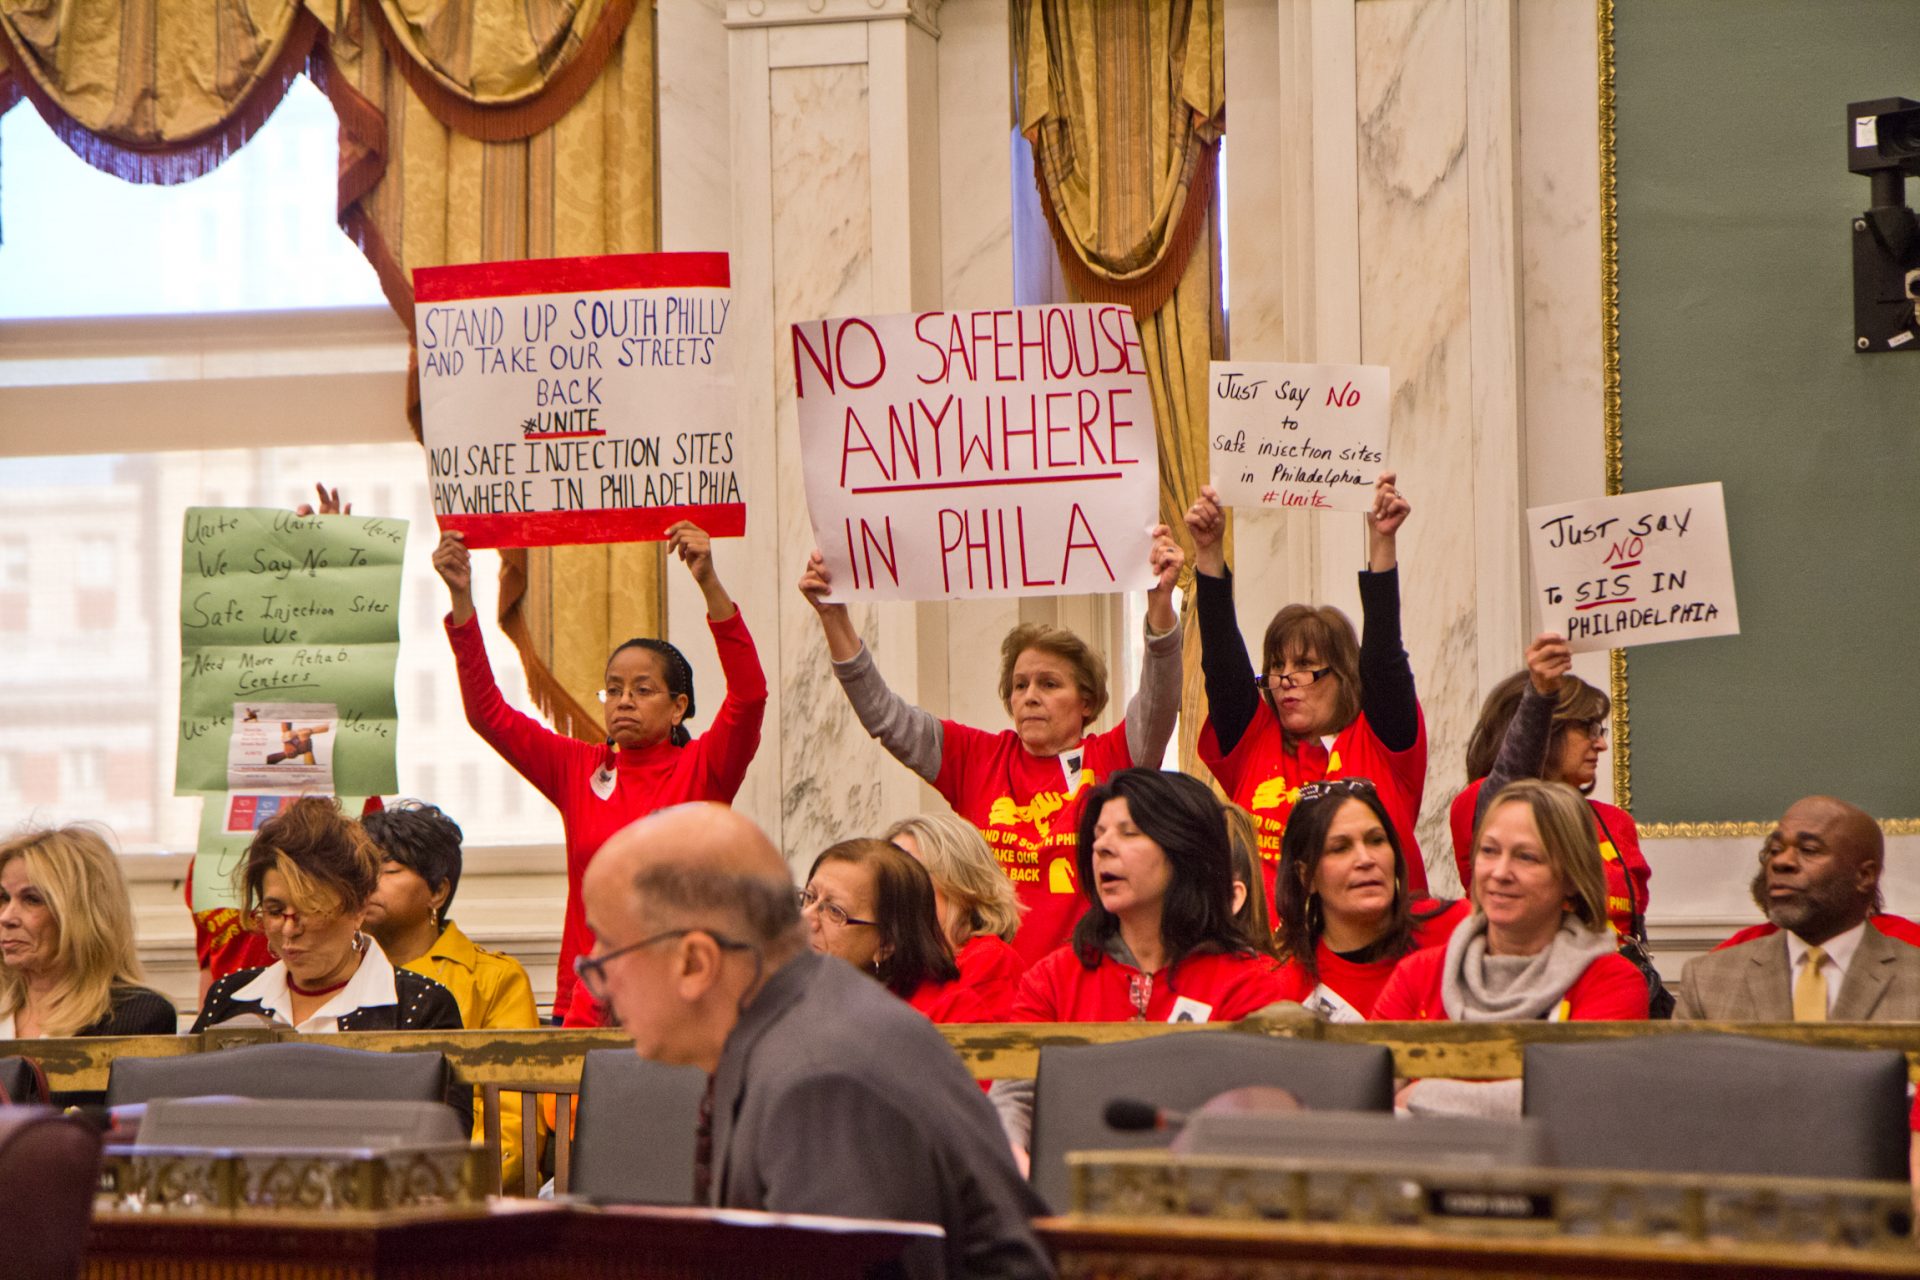 A coalition of South Philadelphia residents cheer opponents of safe injections sites at a March 9, 2020, hearing in City Council.